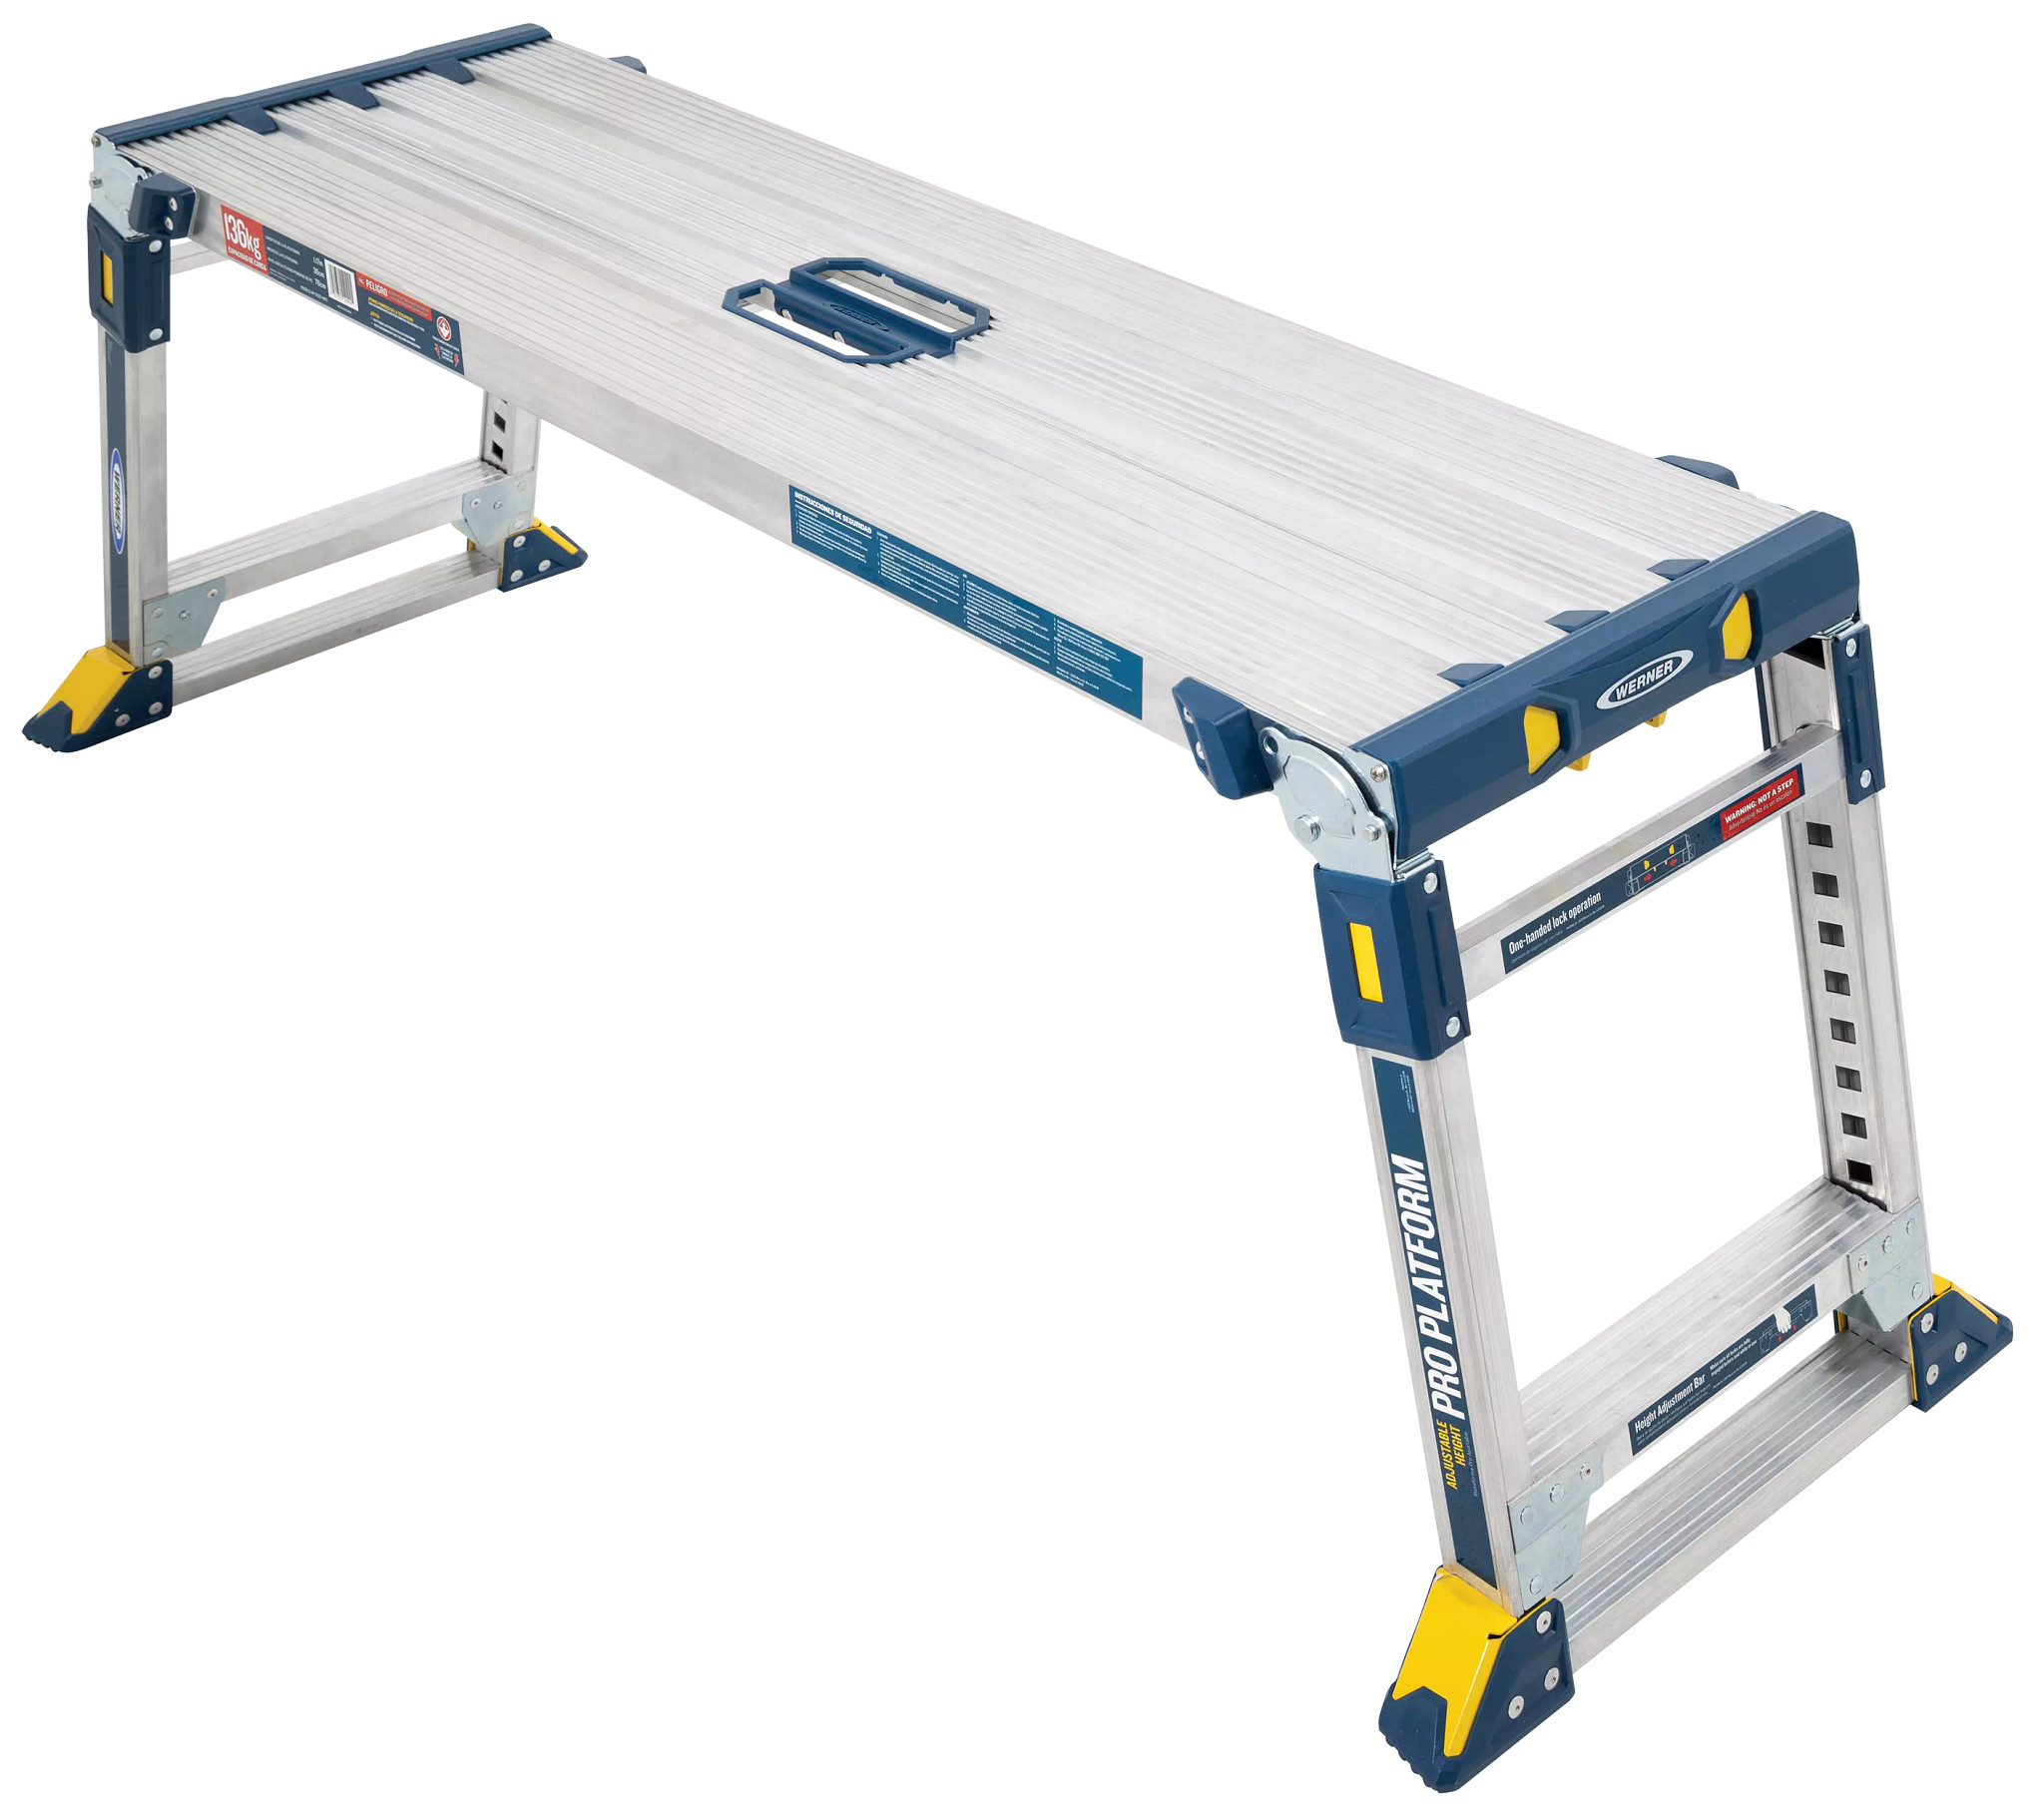 Werner Foldable Work Platform 39-1/2 in x 20-9/16 in Aluminum w/ 225 lbs Load 